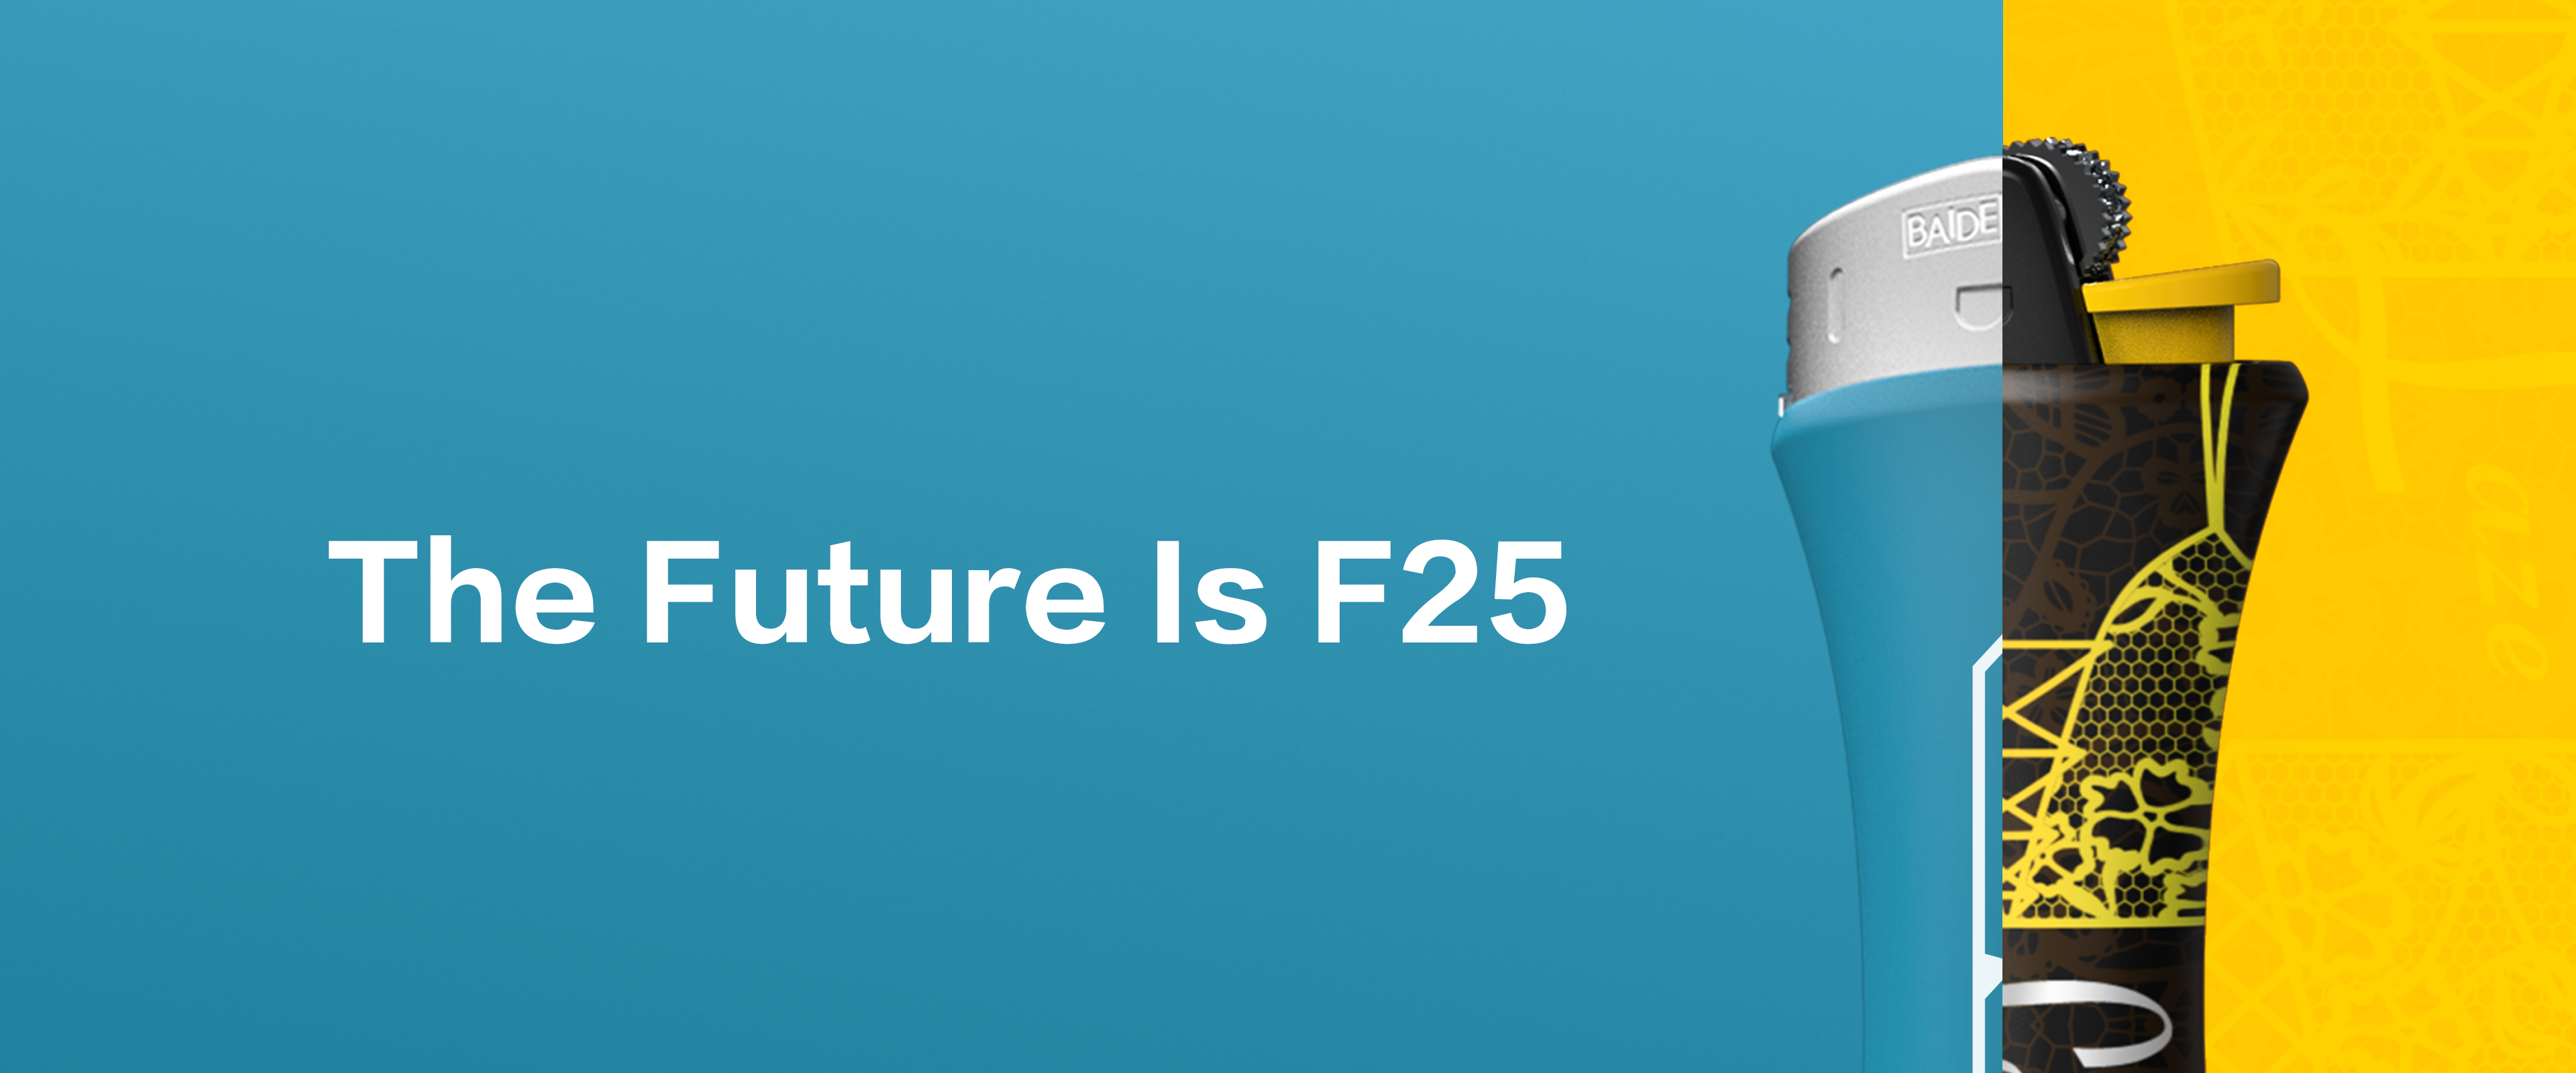 The Future is F25